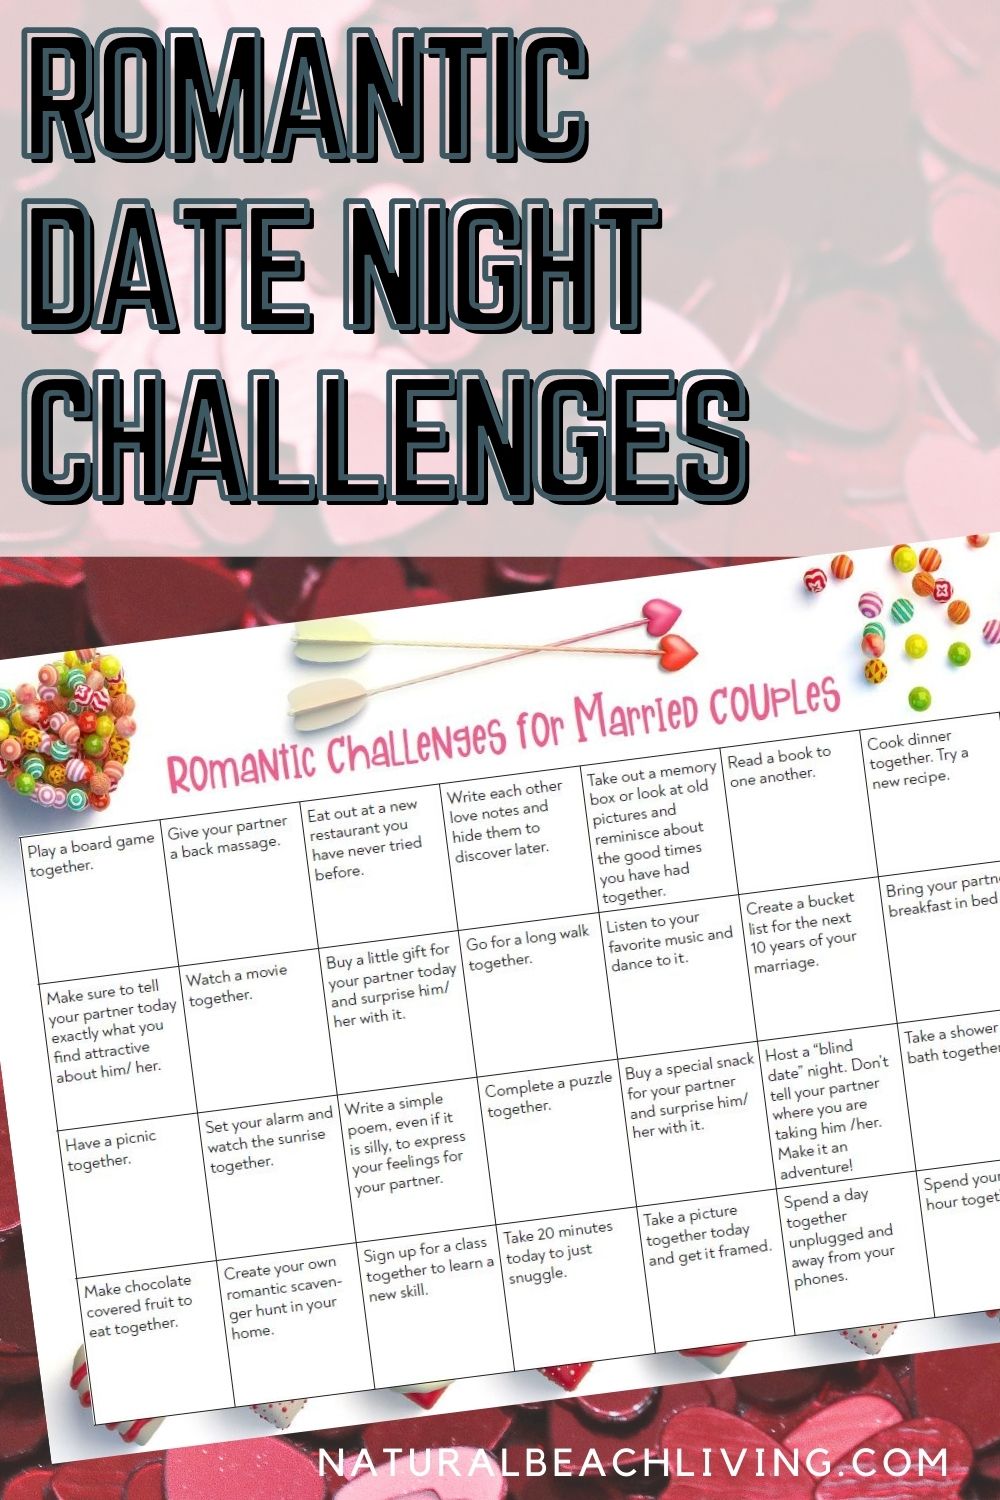 These Romantic Date Night Ideas are great for married couples. A Romantic Date Night Calendar with Creative date night ideas and Date Ideas for Couples for every season. Plus we've shared cheap date night ideas at home that are affordable, simple, and super fun! This Romantic Date Night Ideas Challenge is perfect for you and your significant other. Winter Date Ideas, Date Night Ideas for Married Couples